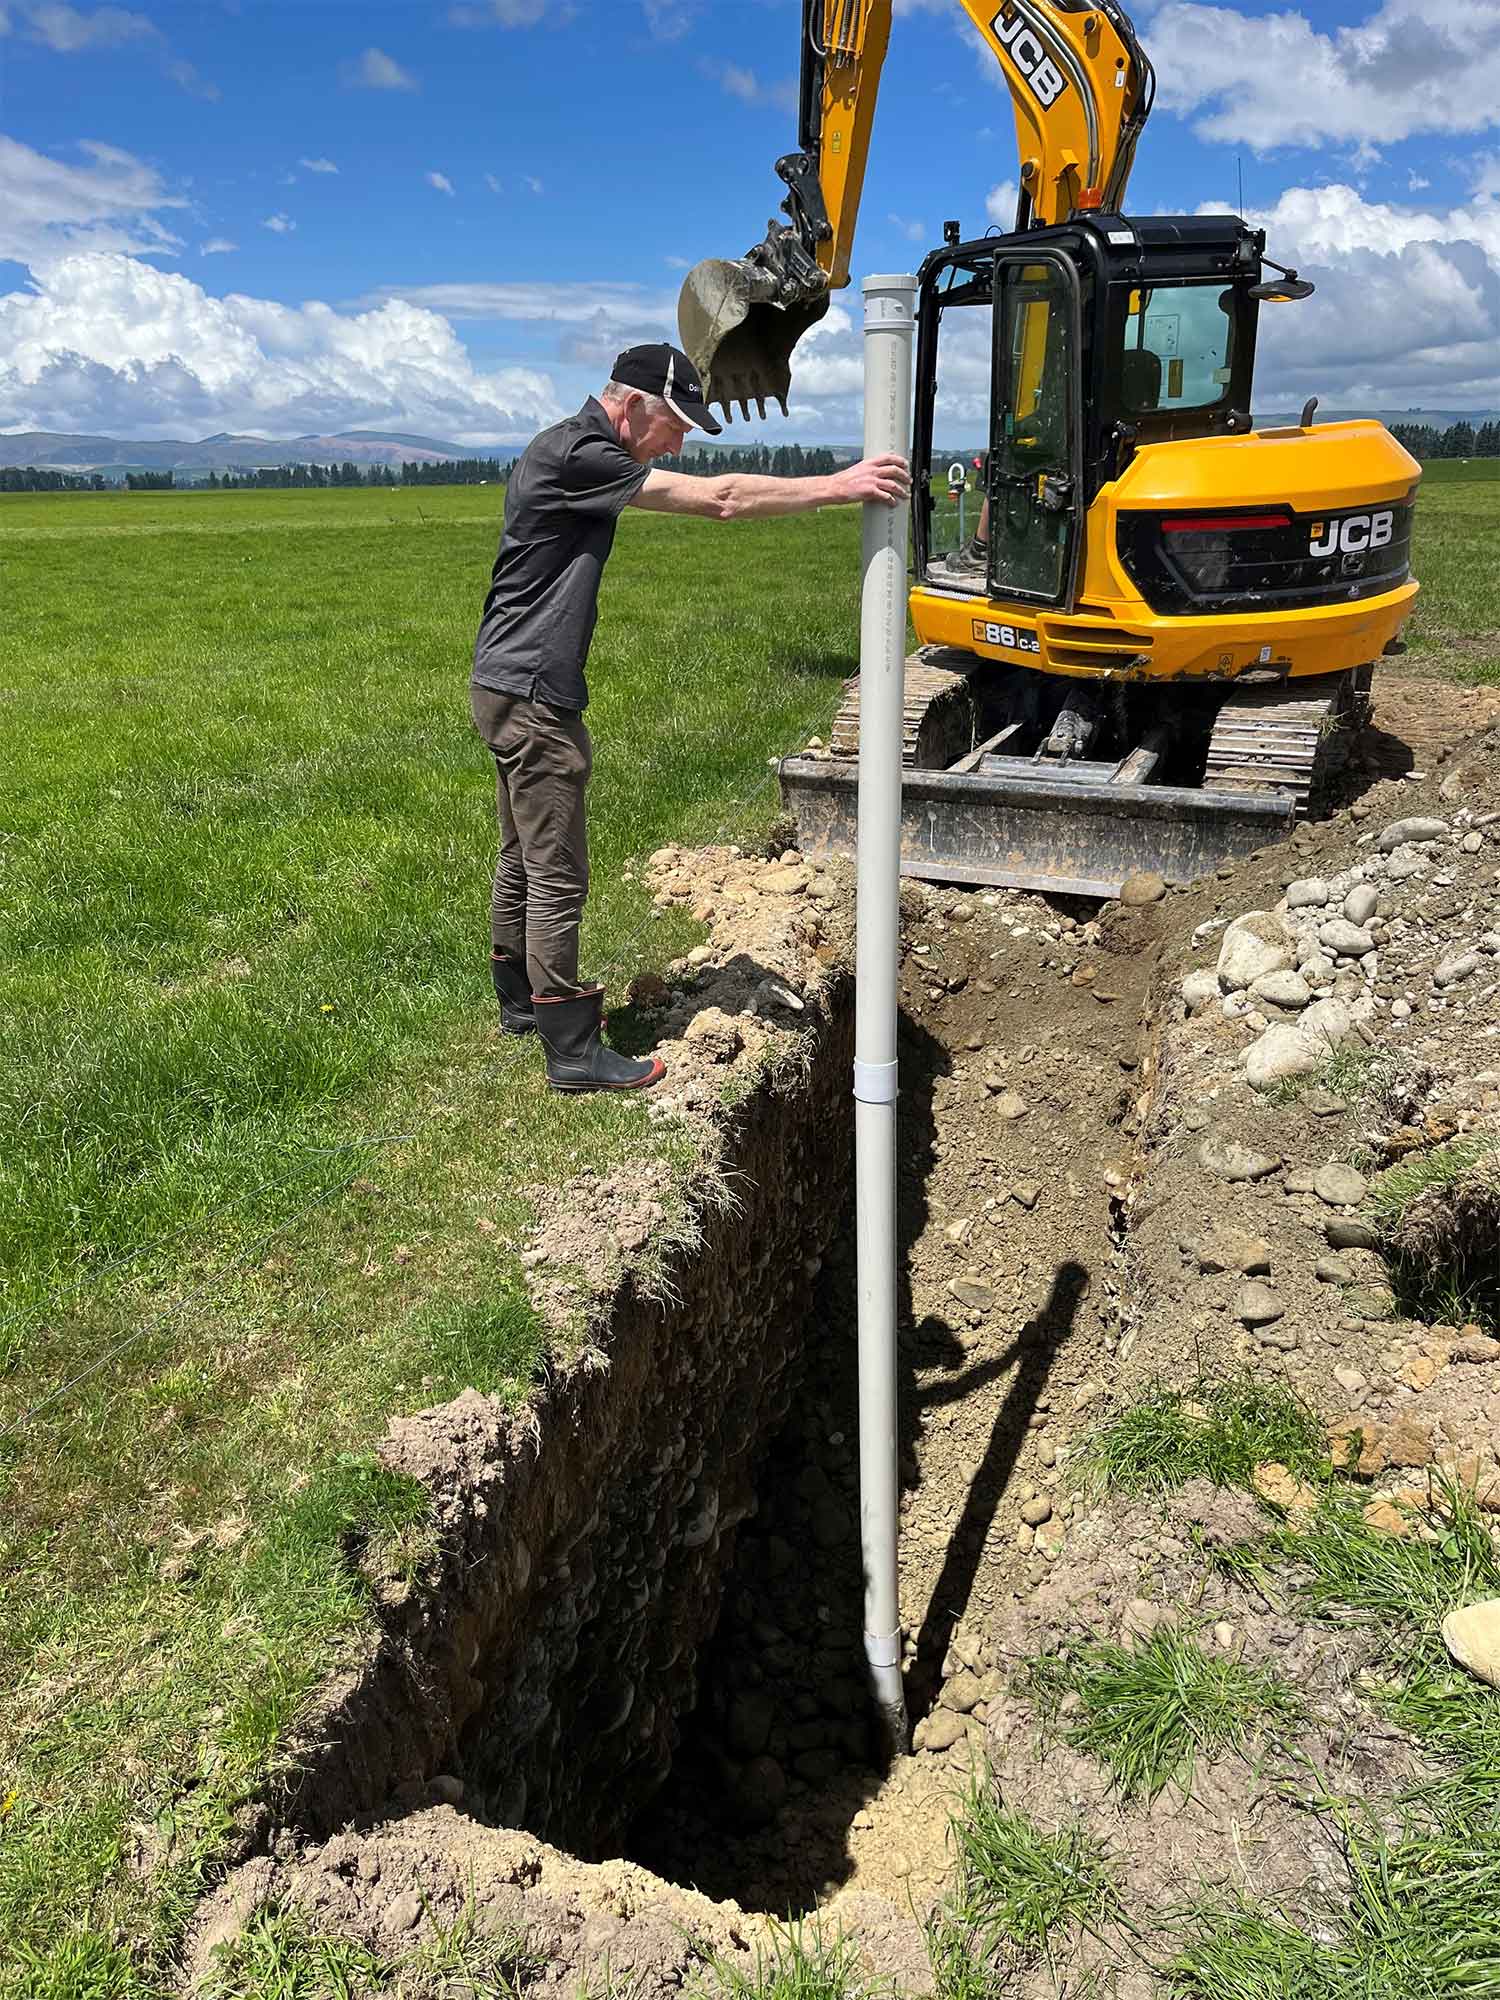 A dairy farmer with a JCB constructing a water well in a paddock